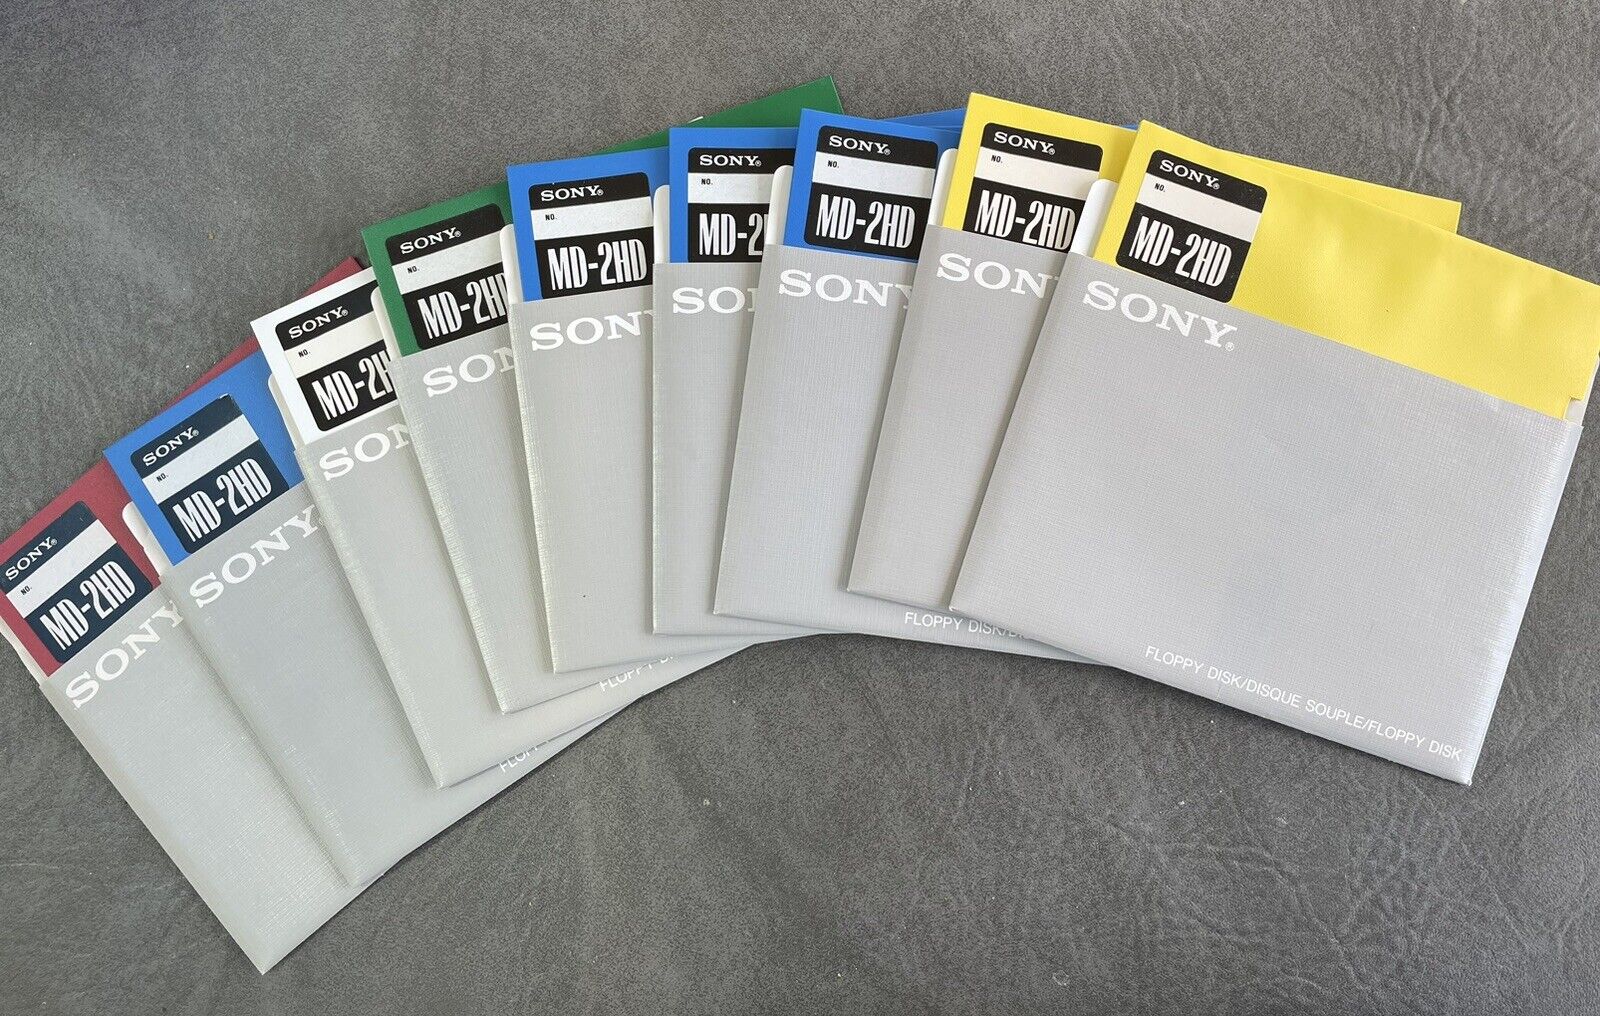 5.25 Sony  MD-2HD Floppy Disks (9 disks total)